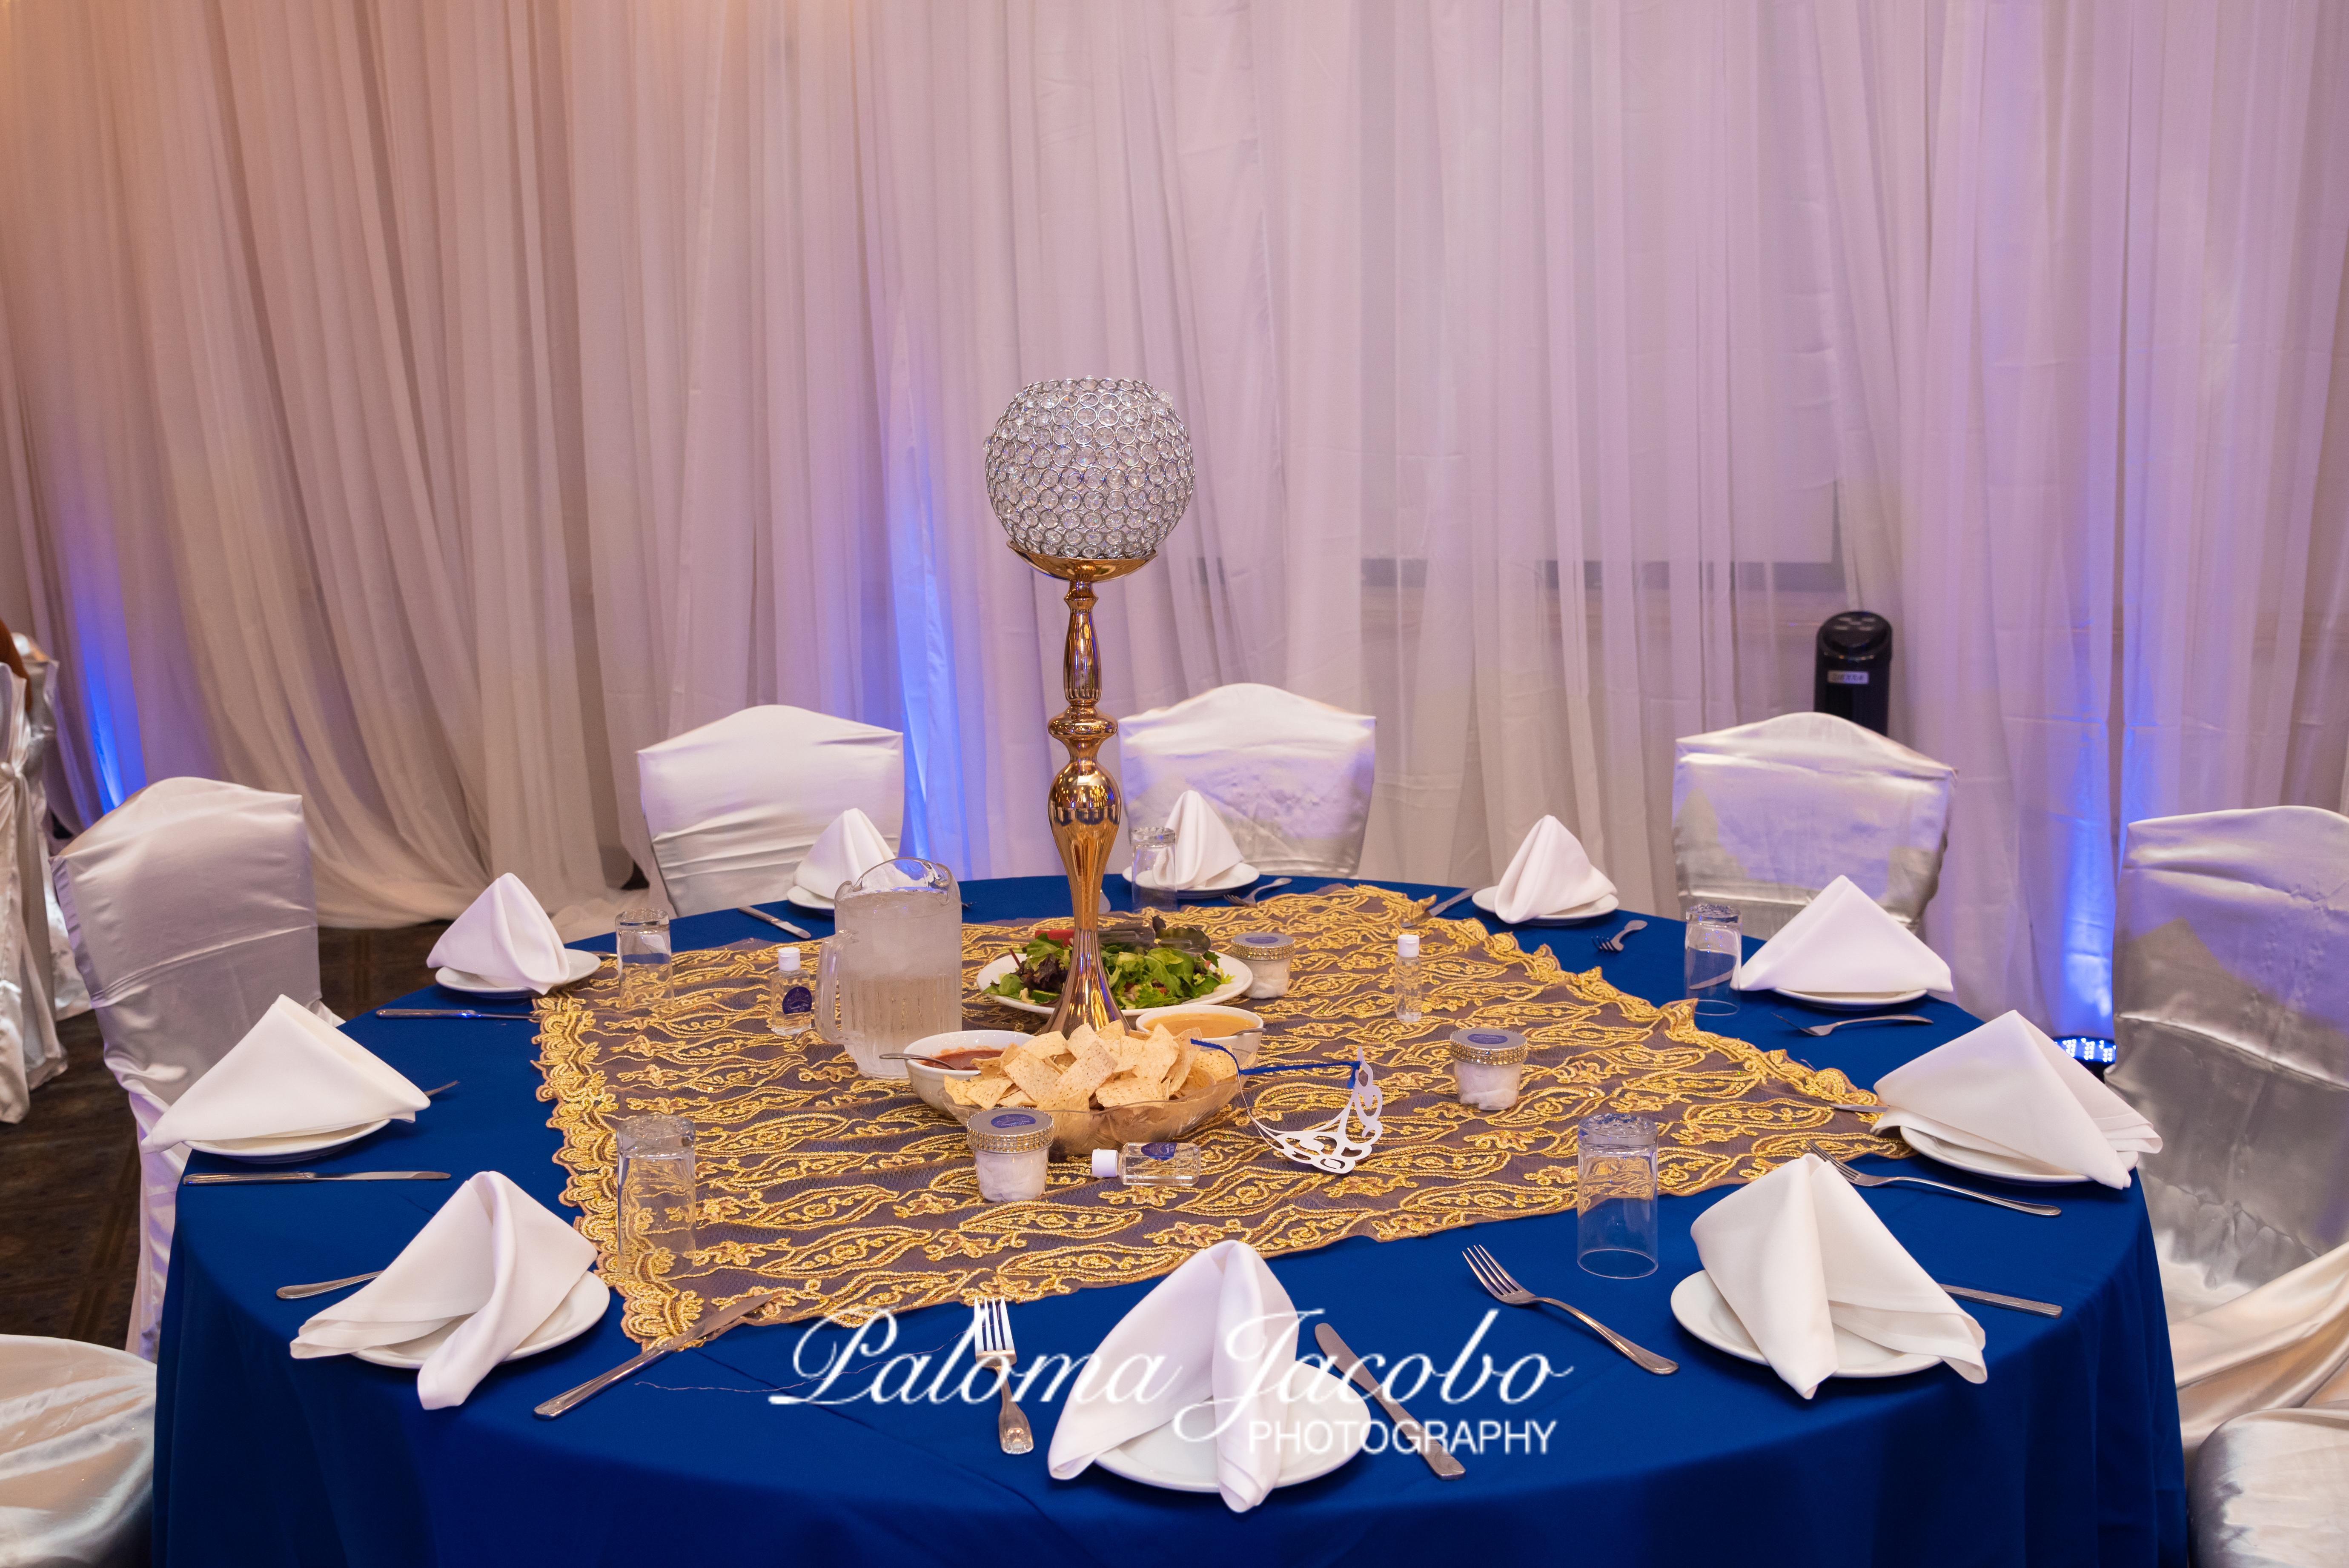 Quinceanera party photography at Cristal Ballroom in El Cajon by Paloma Jacobo Photography